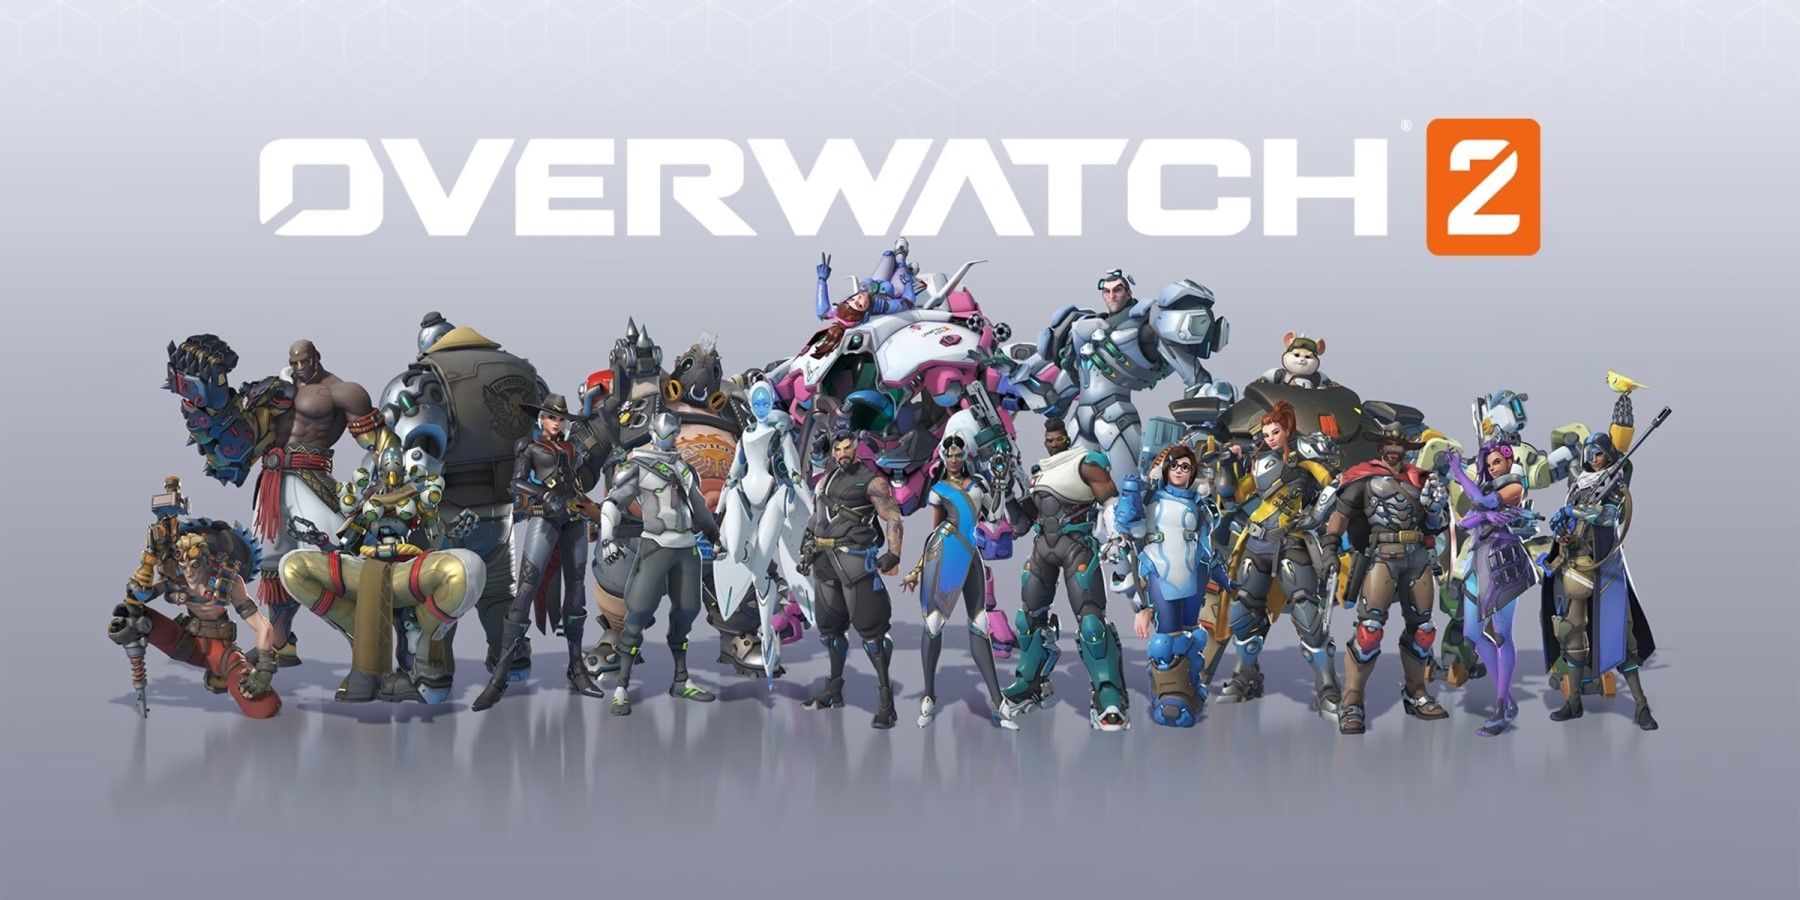 Overwatch 2 heroes pose under the game's logo